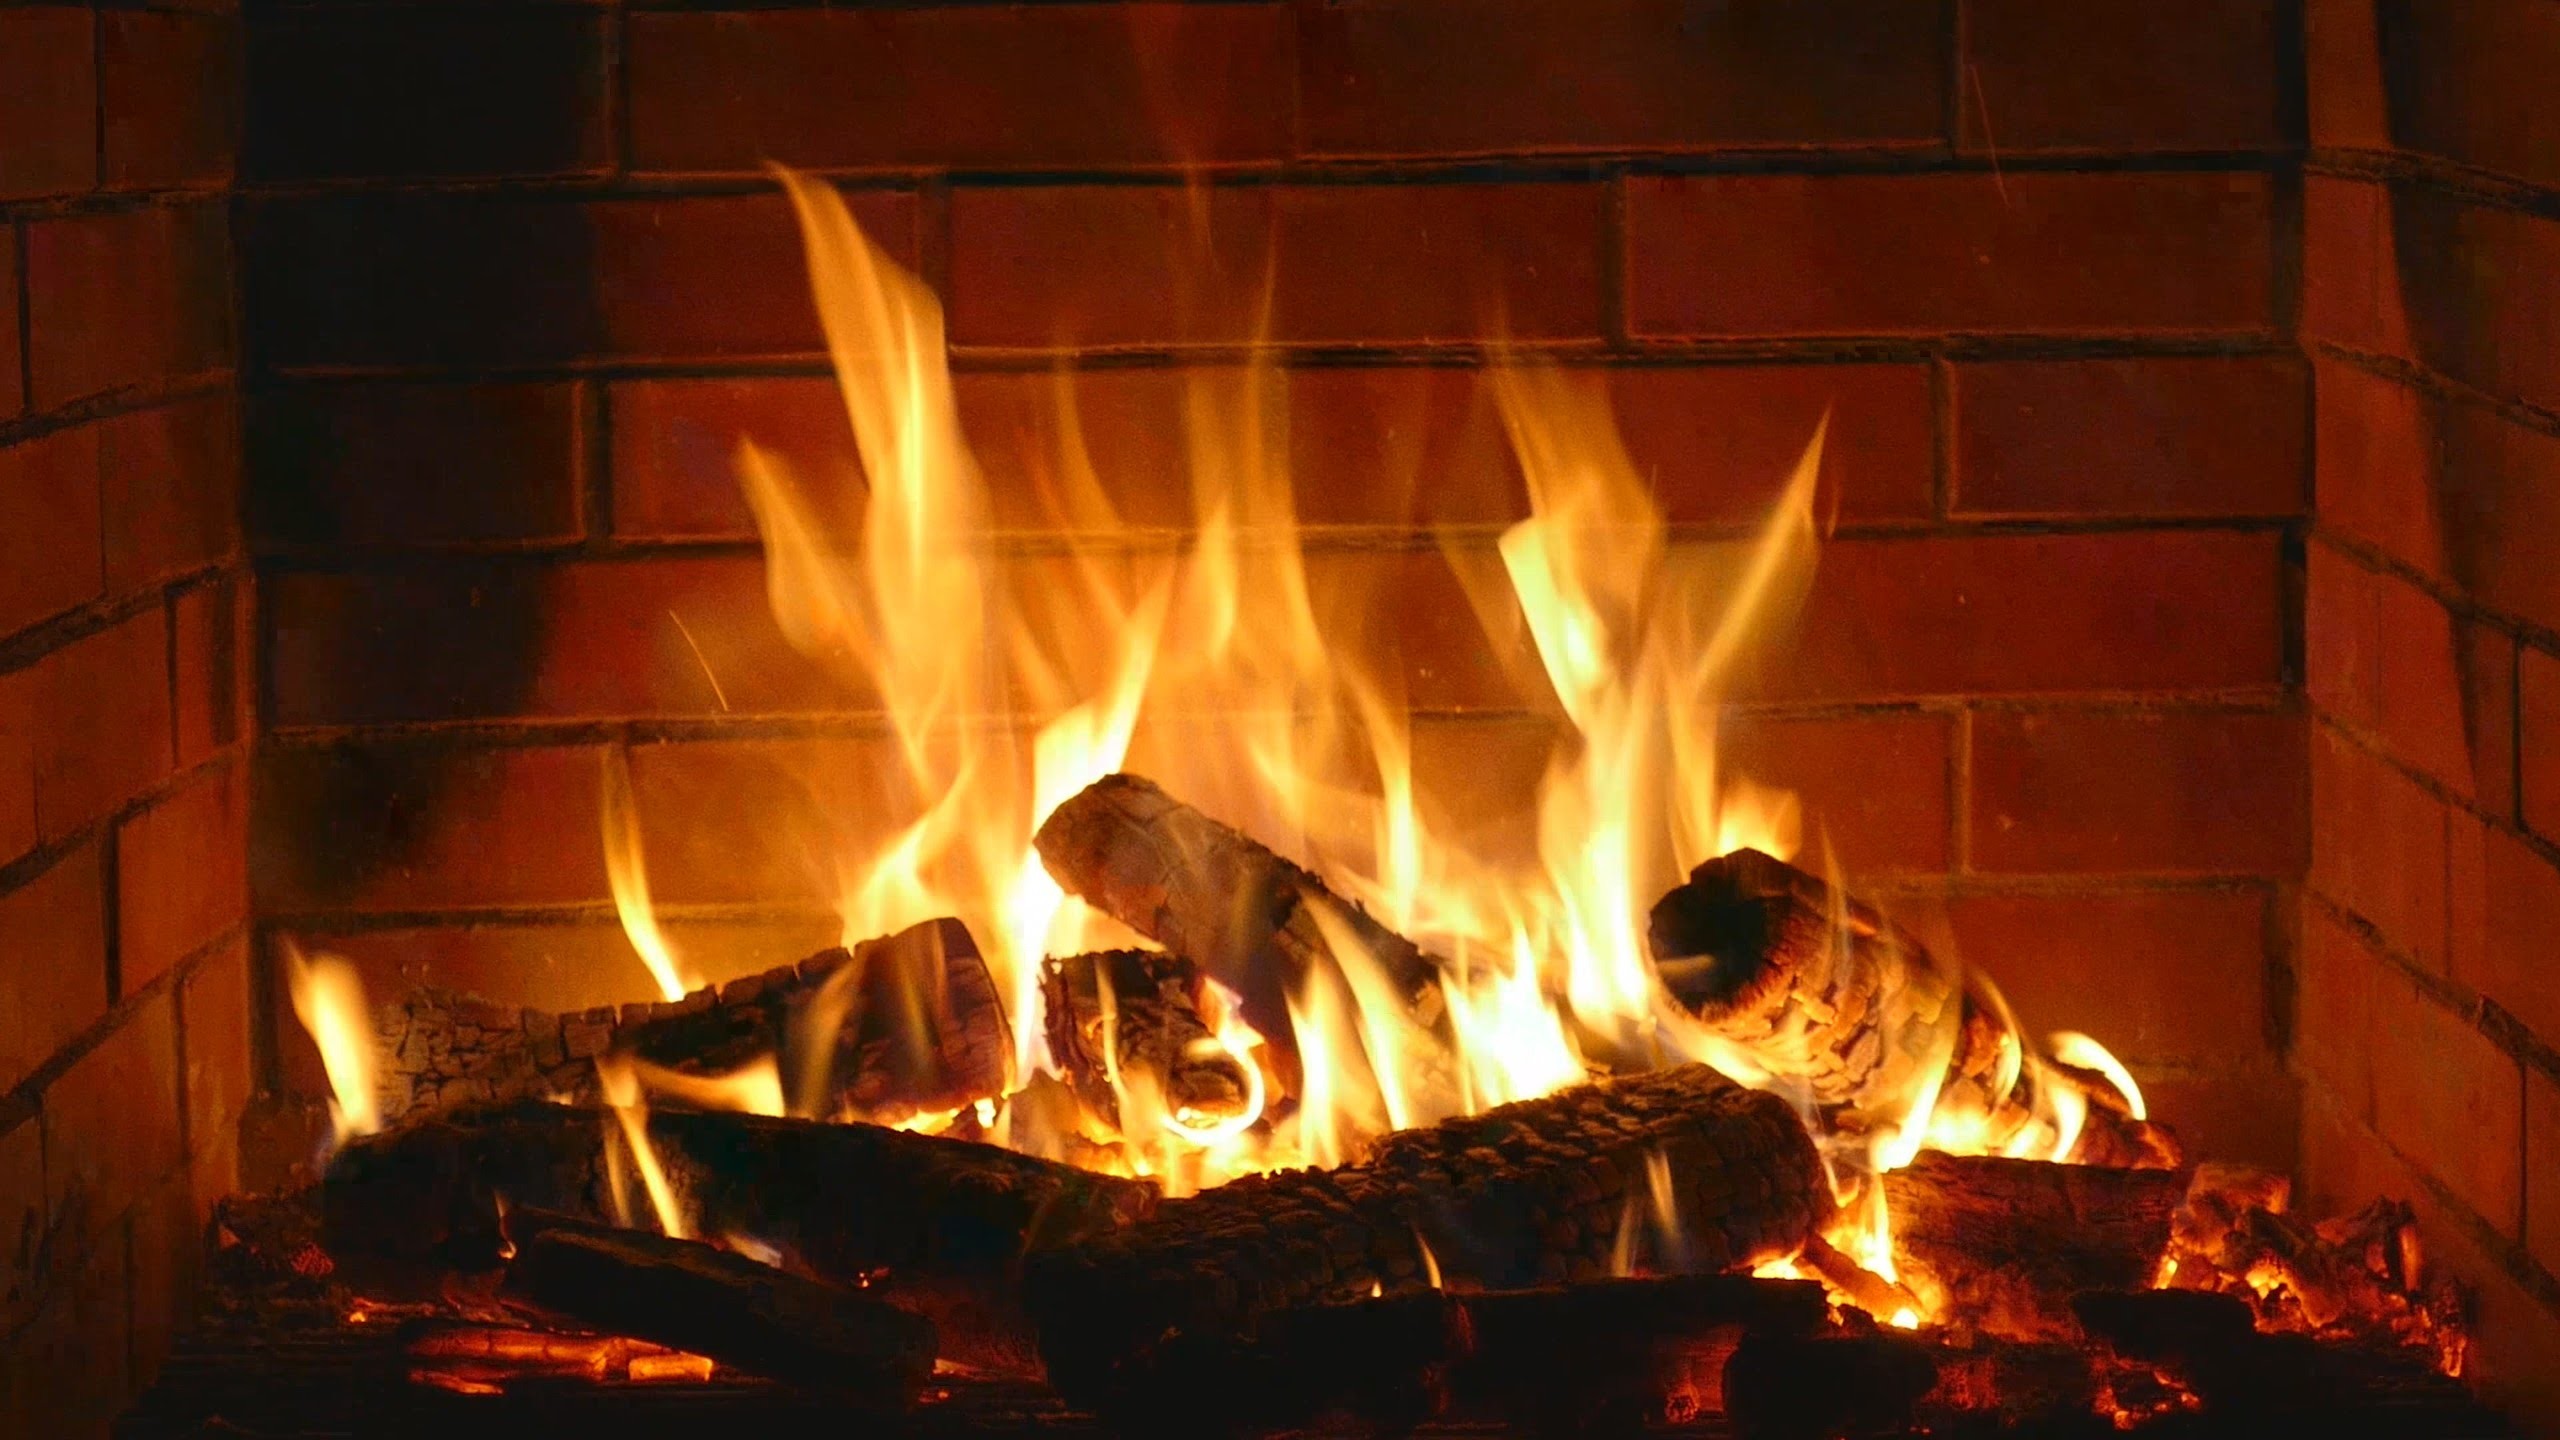 2560x1440 Fireplace - romantic - Full HD and 4K - 2 hours crackling logs Valentine's  Day - Love - YouTube